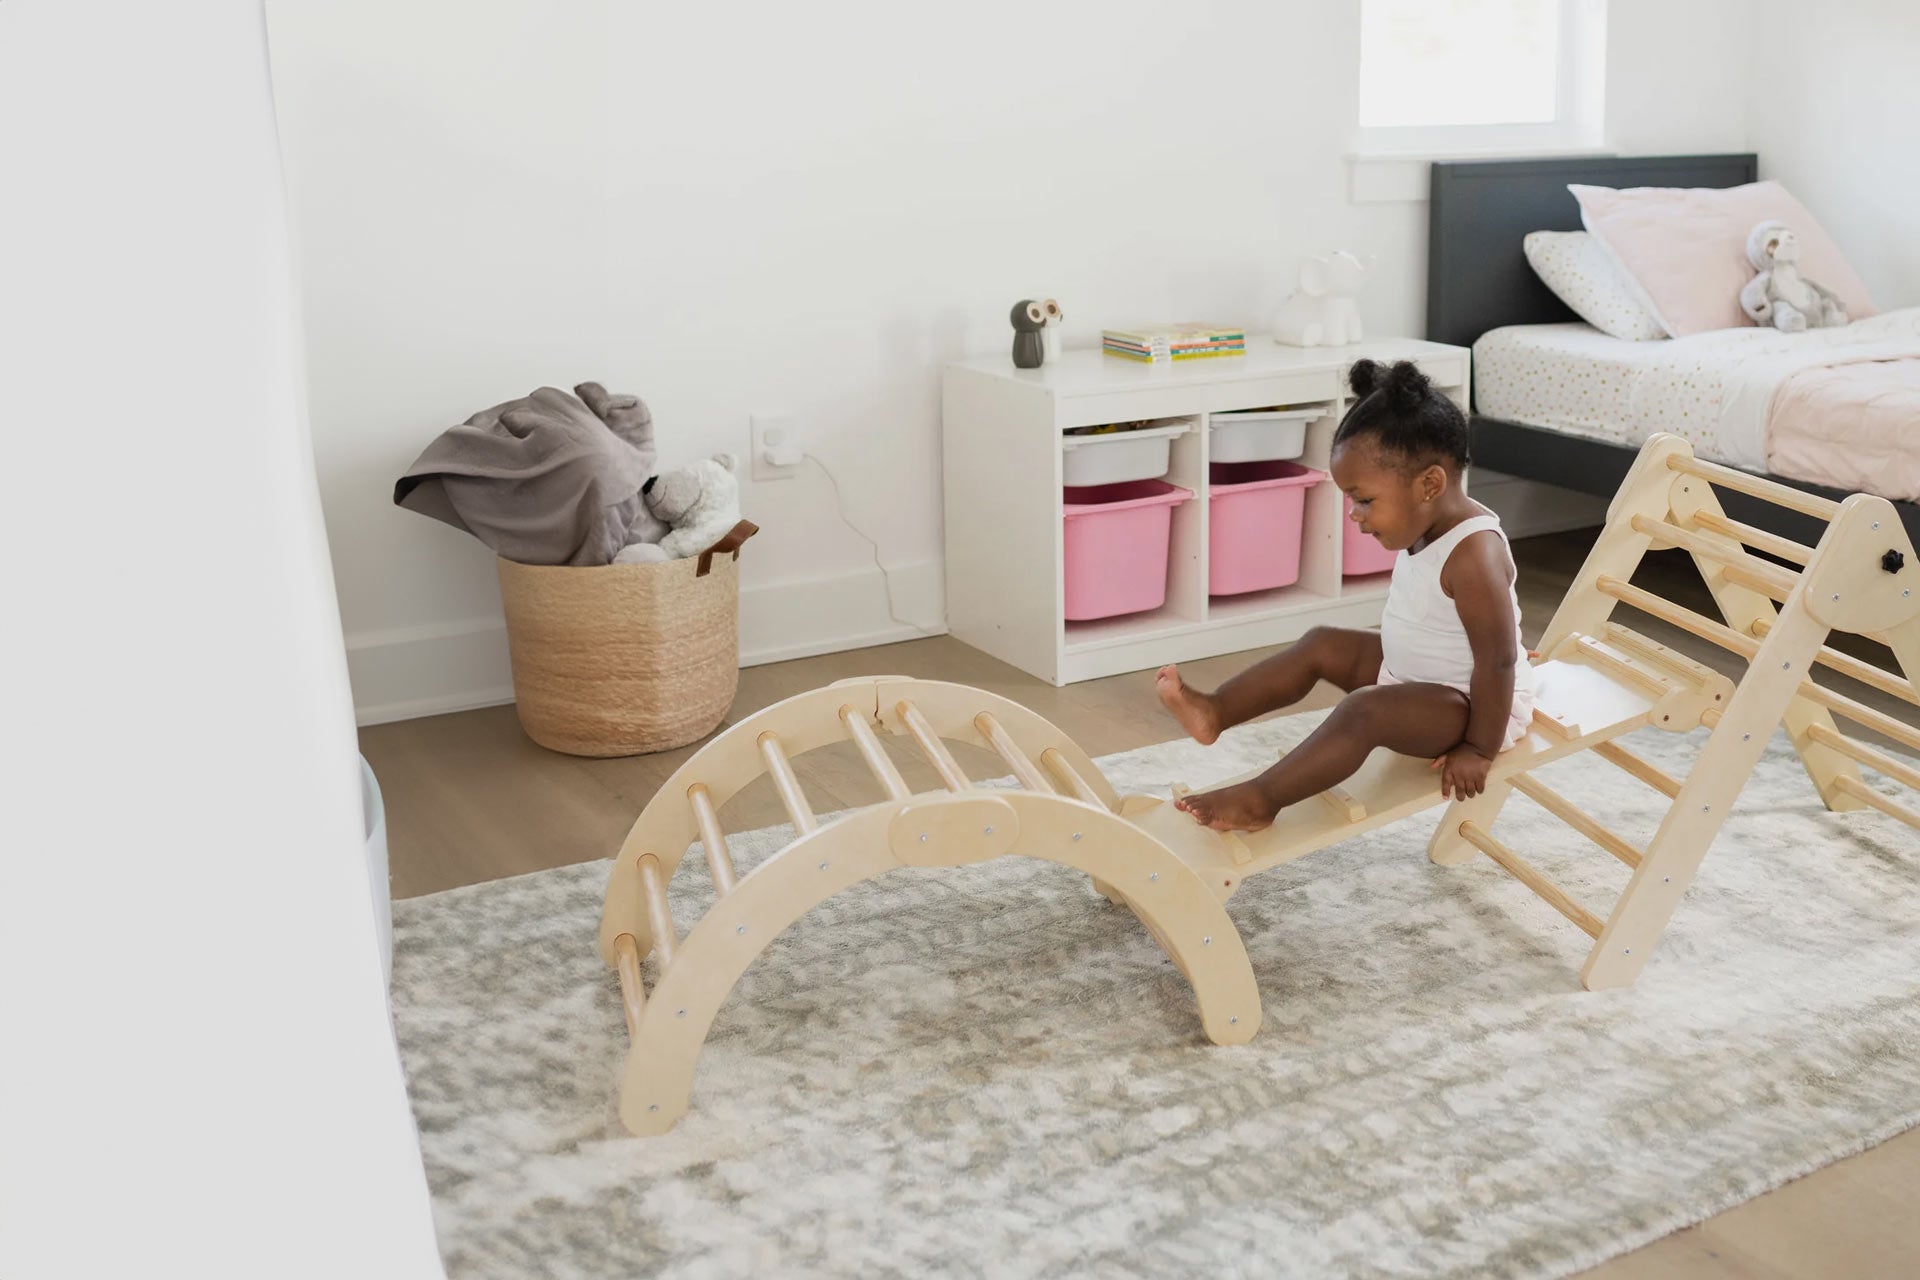 Modern heirloom toys that help kiddos discover balance in their little bodies and help you reclaim balance in the living room.